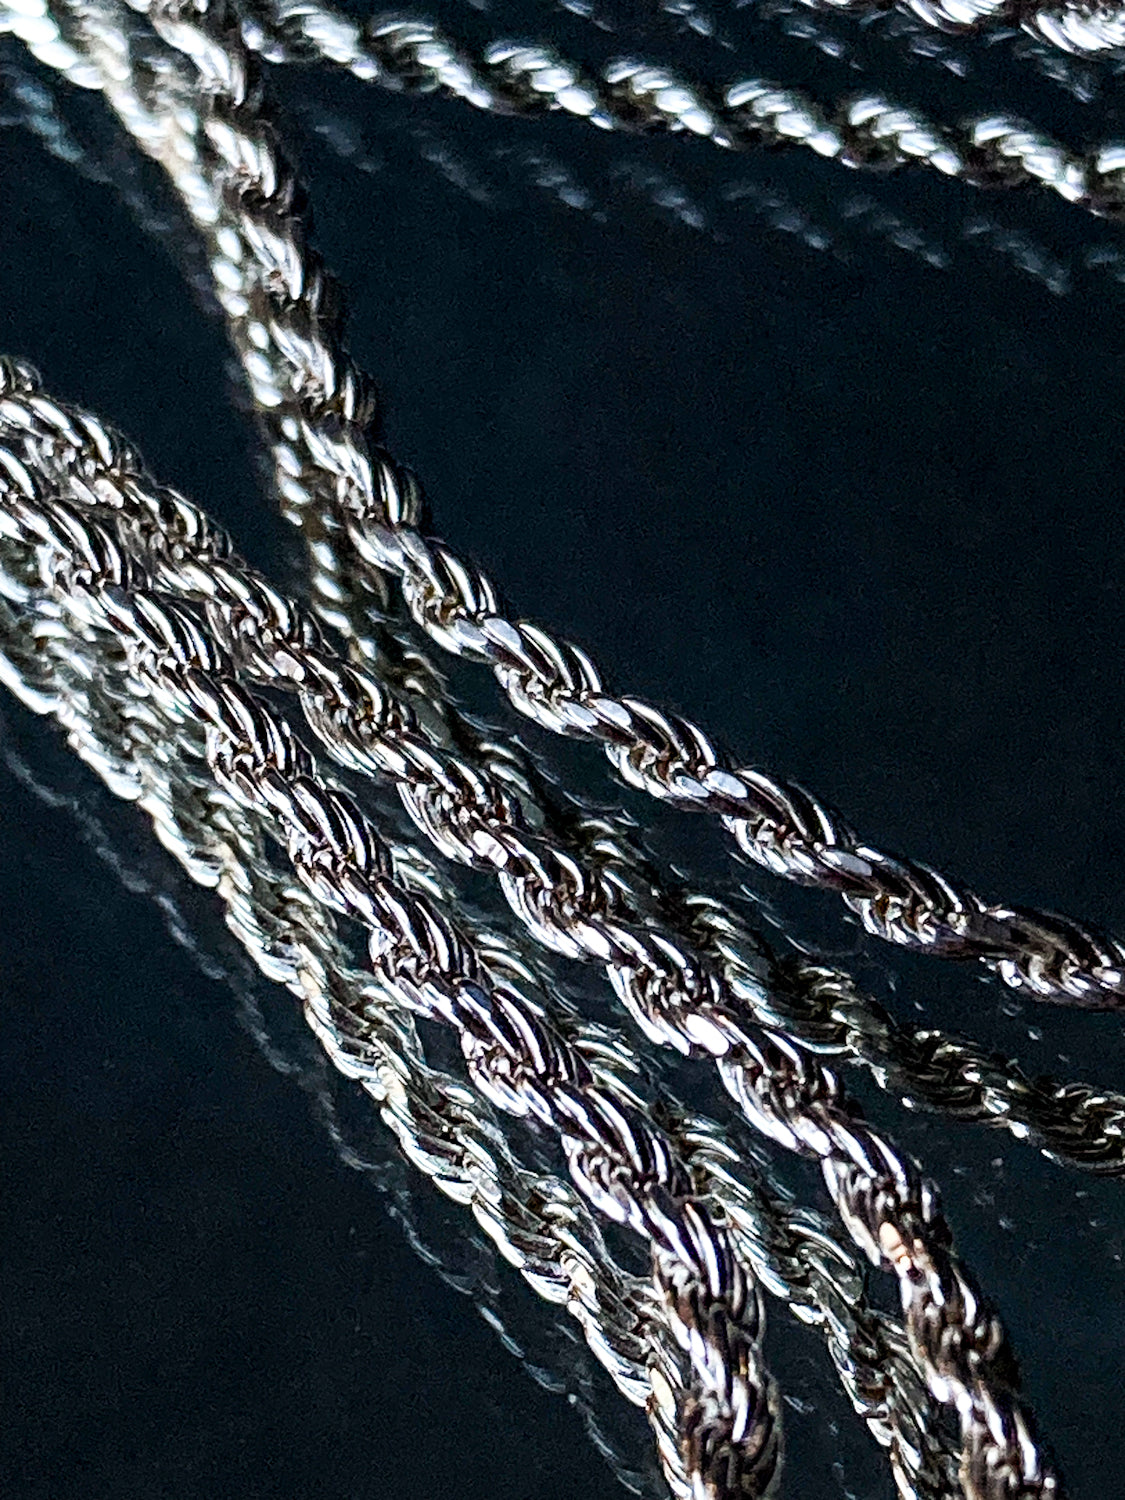 Italian 925 Sterling Silver Twisted Rope 30-Inch Chain Necklace